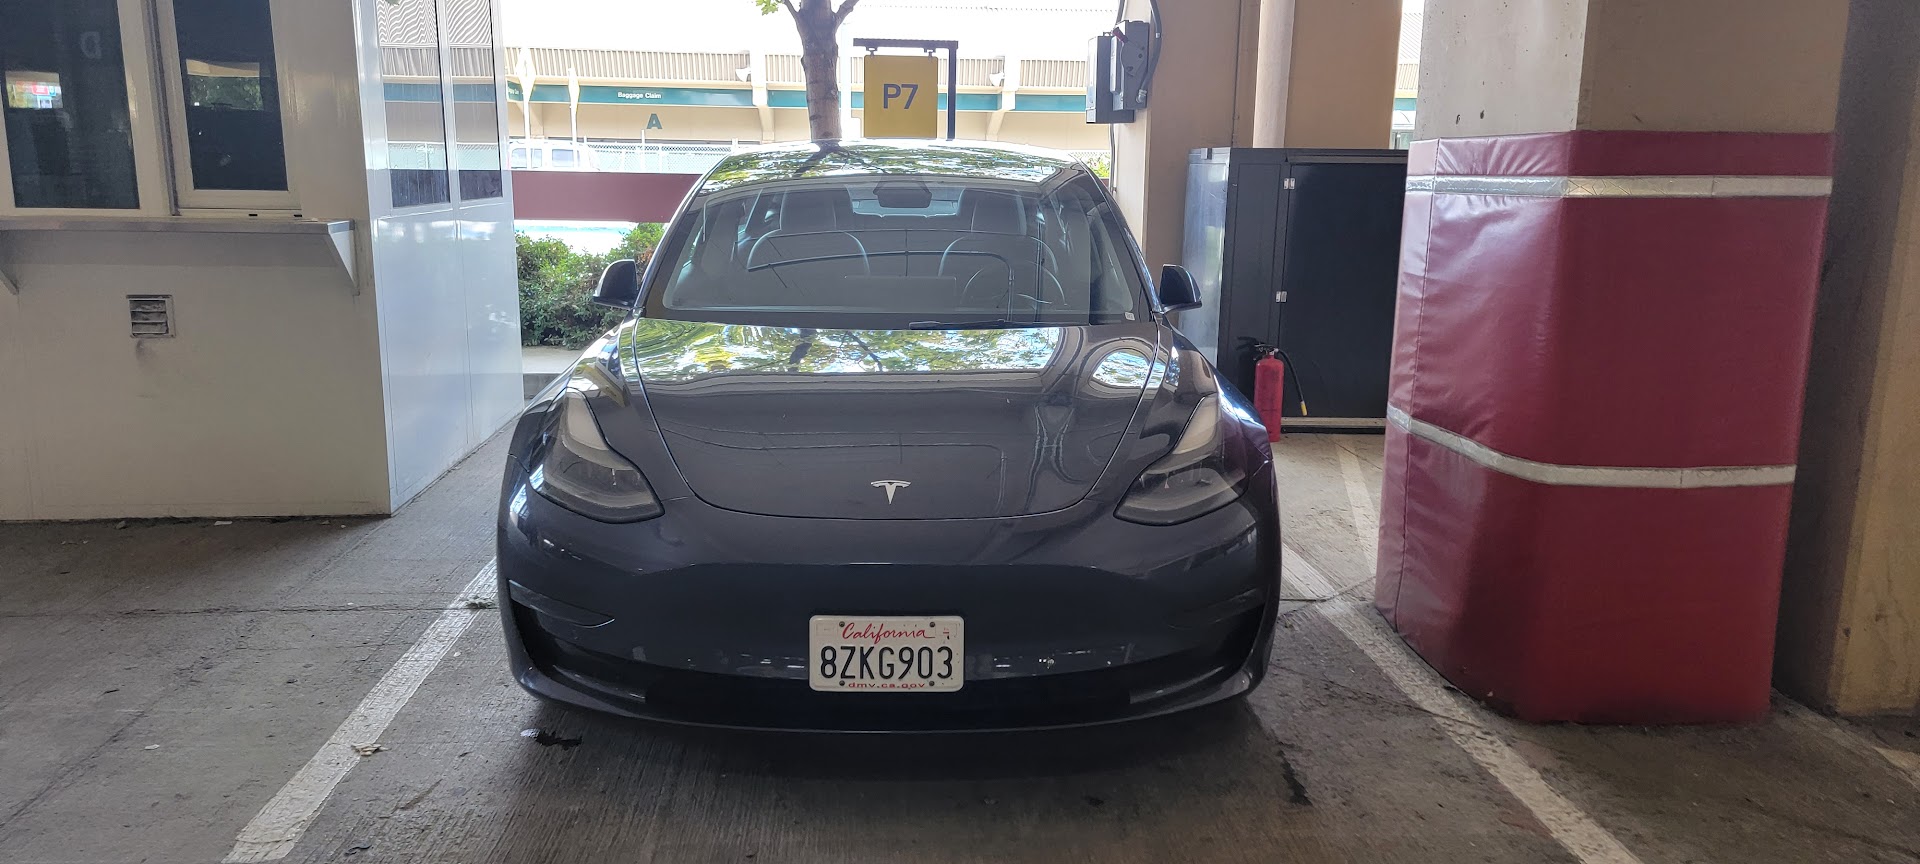 A Hertz Presidents Circle customer was charged a fee of $277.39 for not filling up the gas on a Tesla model 3 in Los Angeles.  This is an obvious, imp